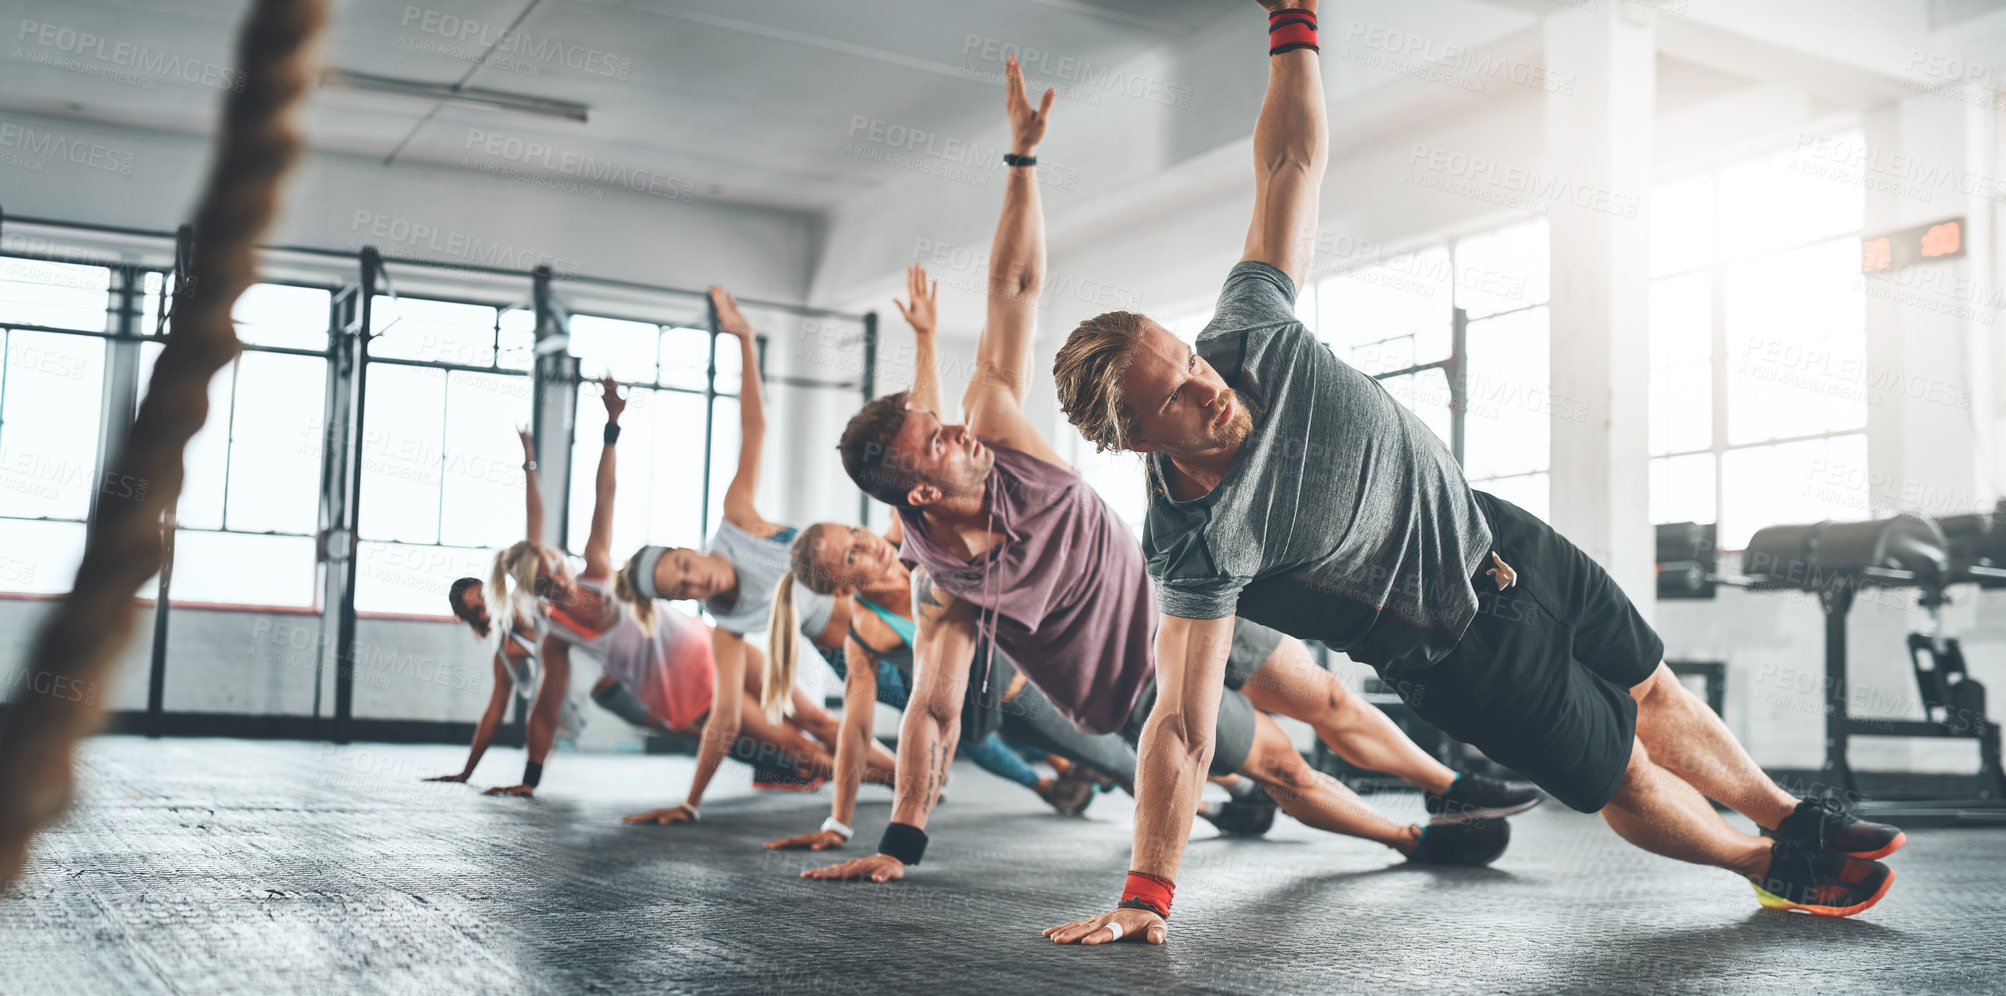 Buy stock photo Fitness class, group and people doing a workout in the gym for health, wellness and flexibility. Sports, training and athletes doing a side plank exercise challenge together in sport studio or center